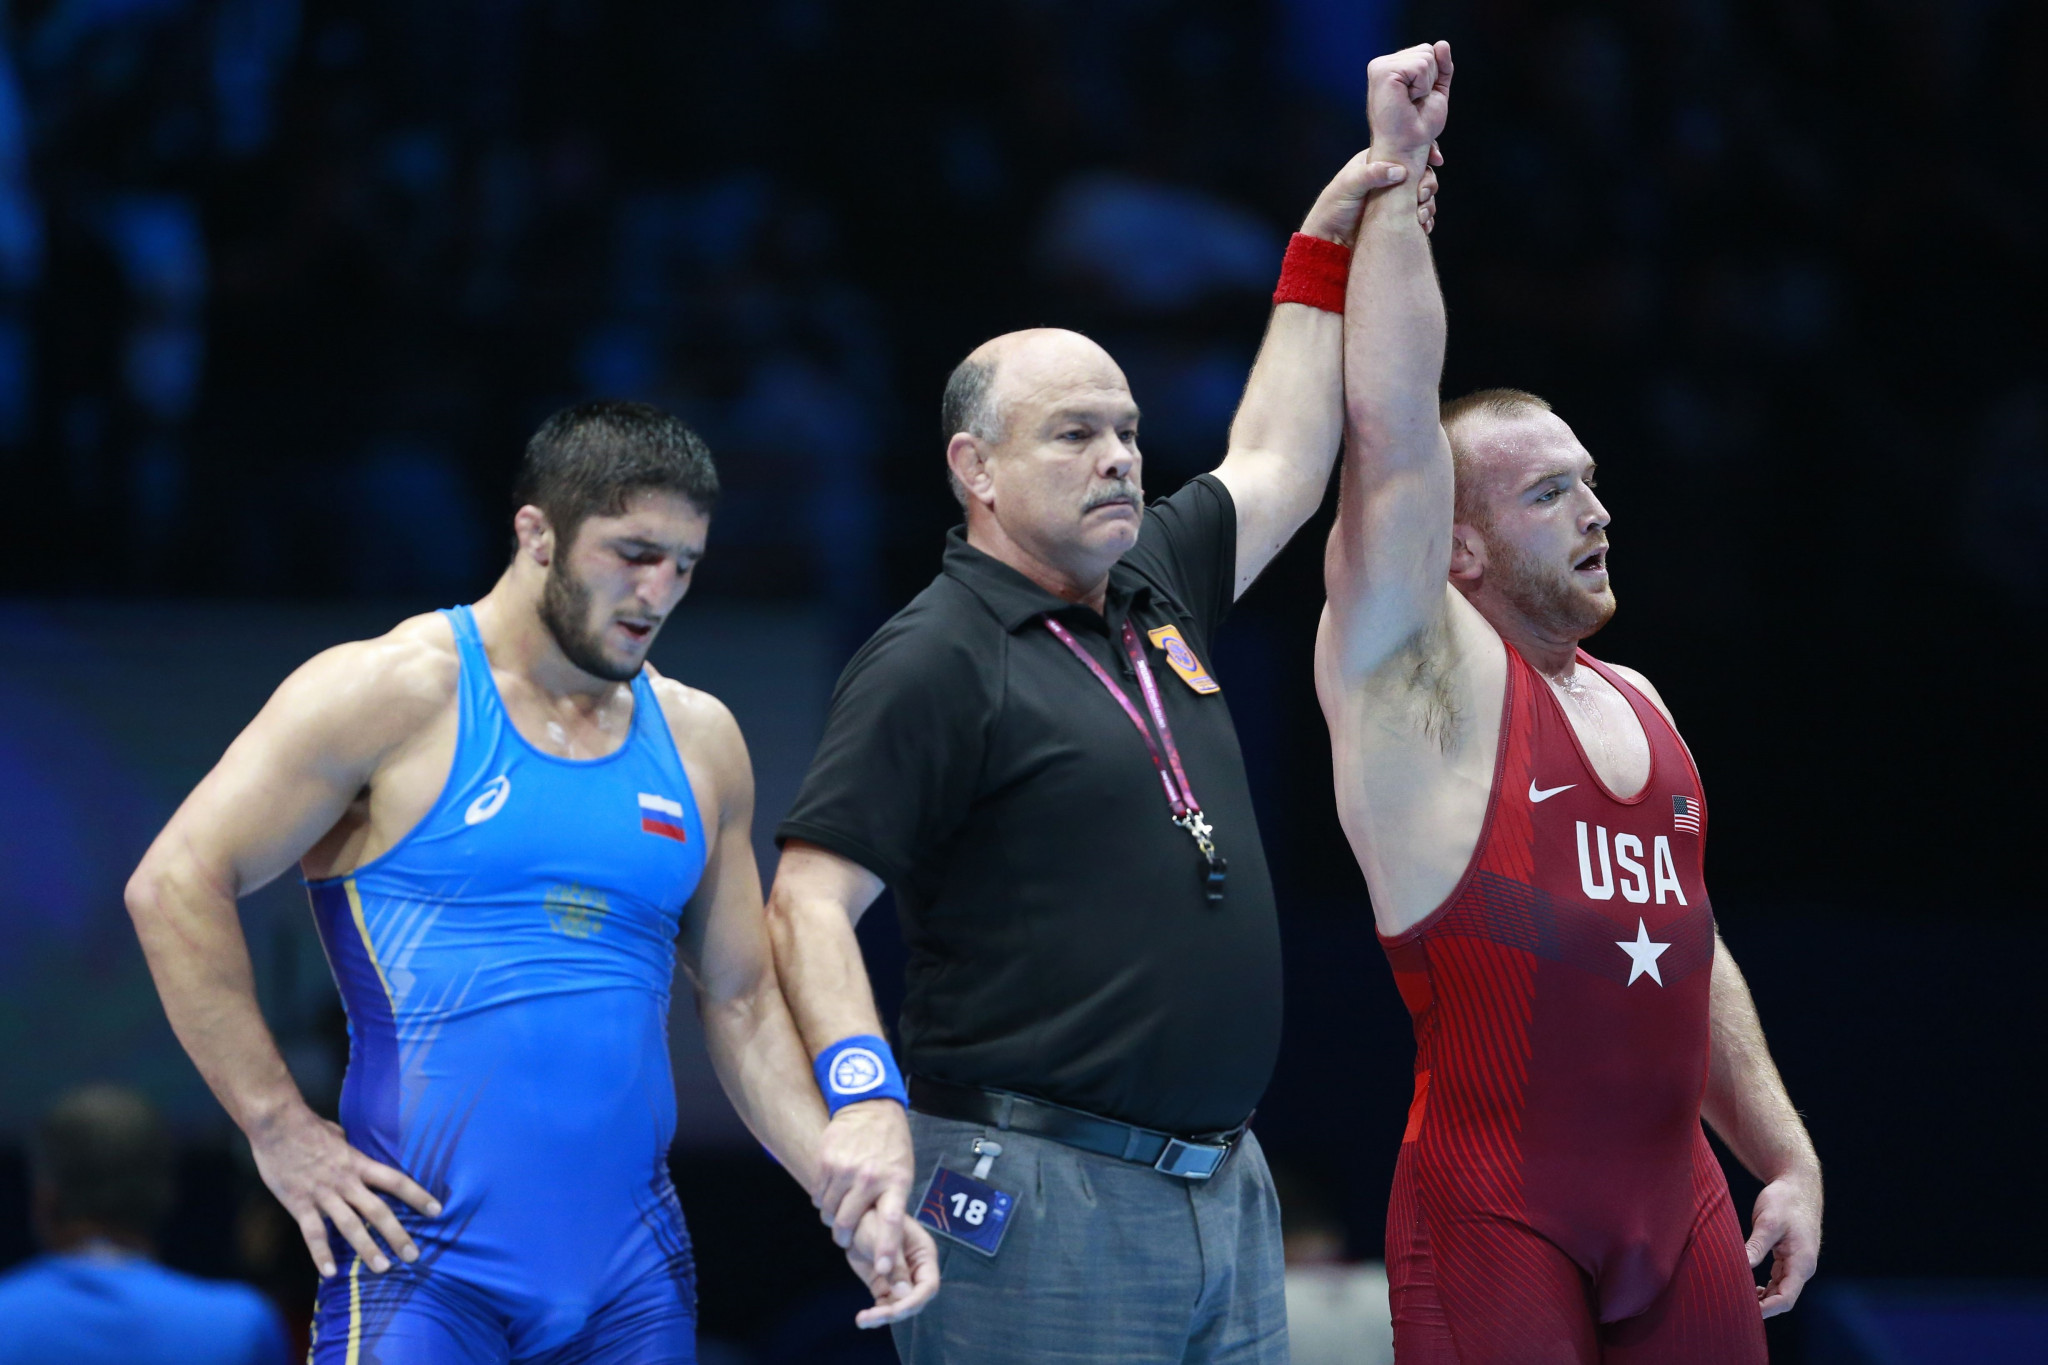 Bill Zadick led the United States' Kyle Snyder to 97kg gold at the 2017 World Wrestling Championships in Paris ©Getty Images